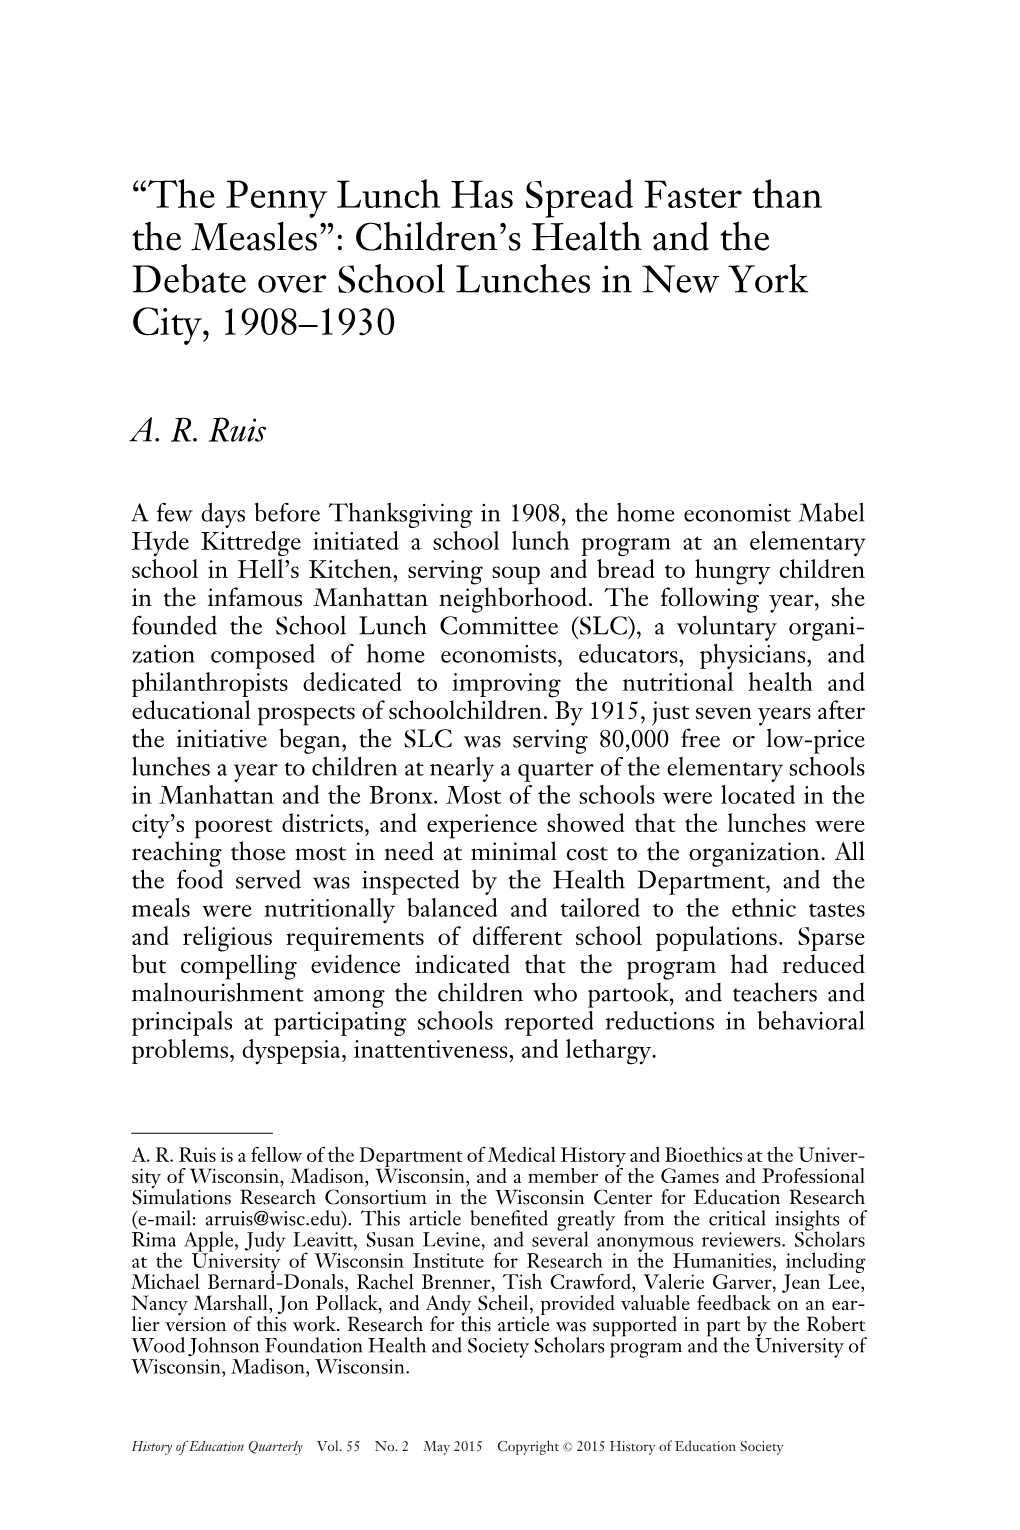 “The Penny Lunch Has Spread Faster Than the Measles”: Children’S Health and the Debate Over School Lunches in New York City, 1908–1930